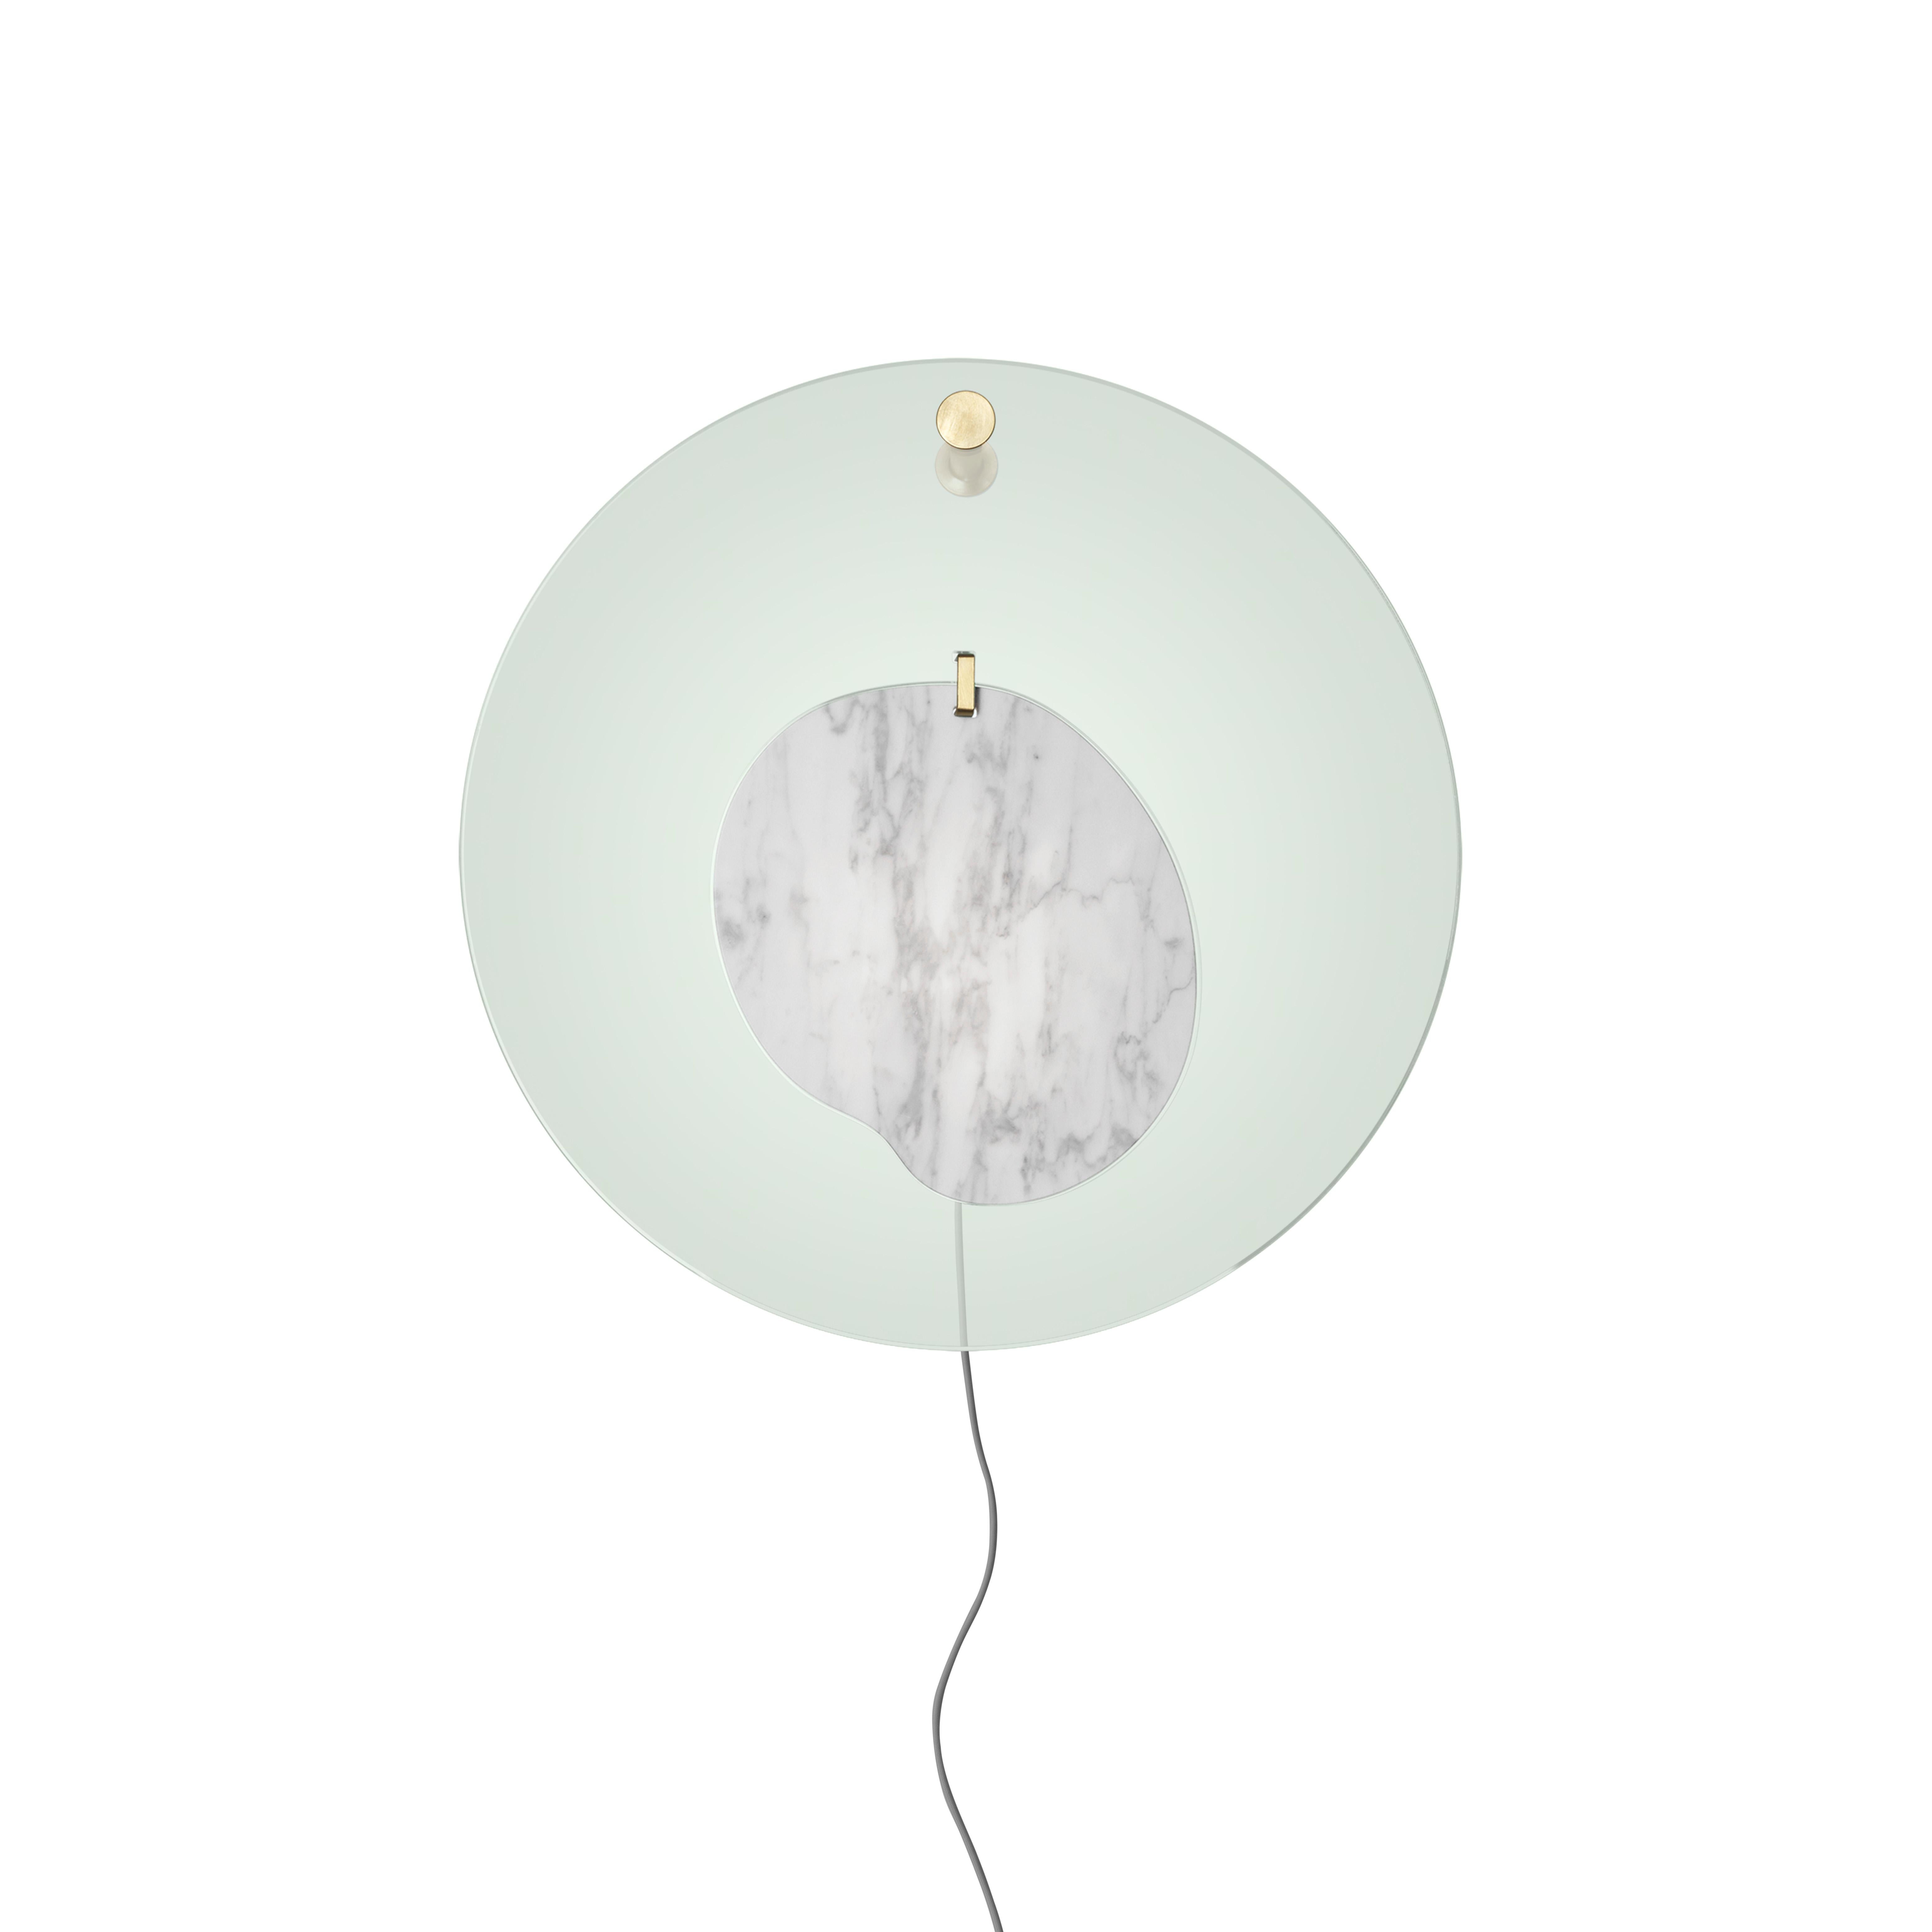 Gioia is a jewel created to adorn domestic space. The magic of the lamp lies in its composition: an element in statuary marble placed at the centre of a transparent disk. The two parts are free to move, as in the swaying rhythm of a pendant or an